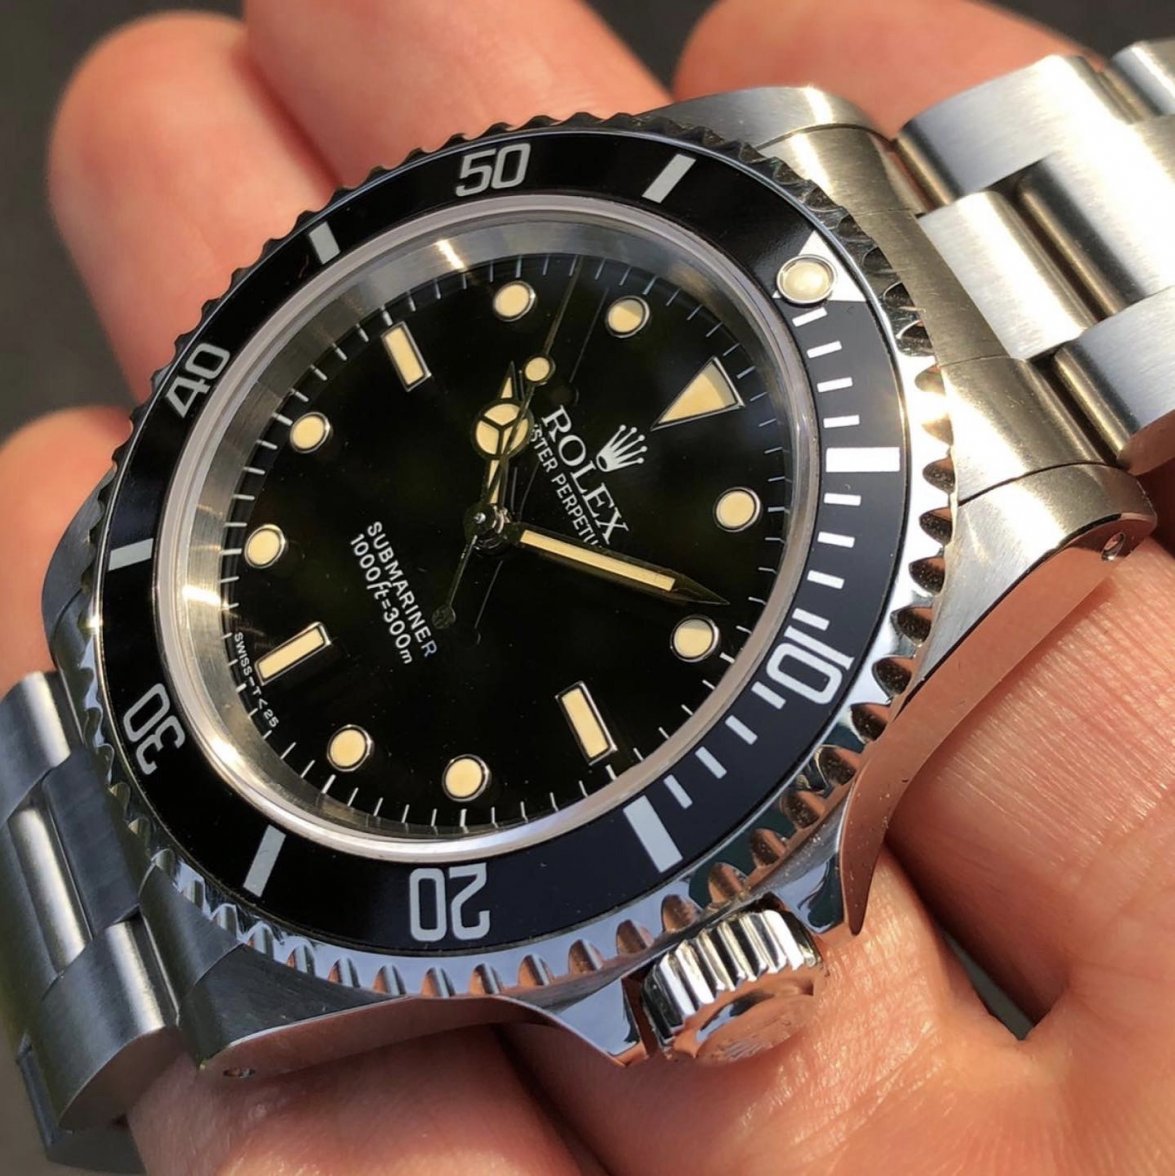 Gensidig bygning hat Rolex Submariner 14060 1990 A Serviced With Warranty And